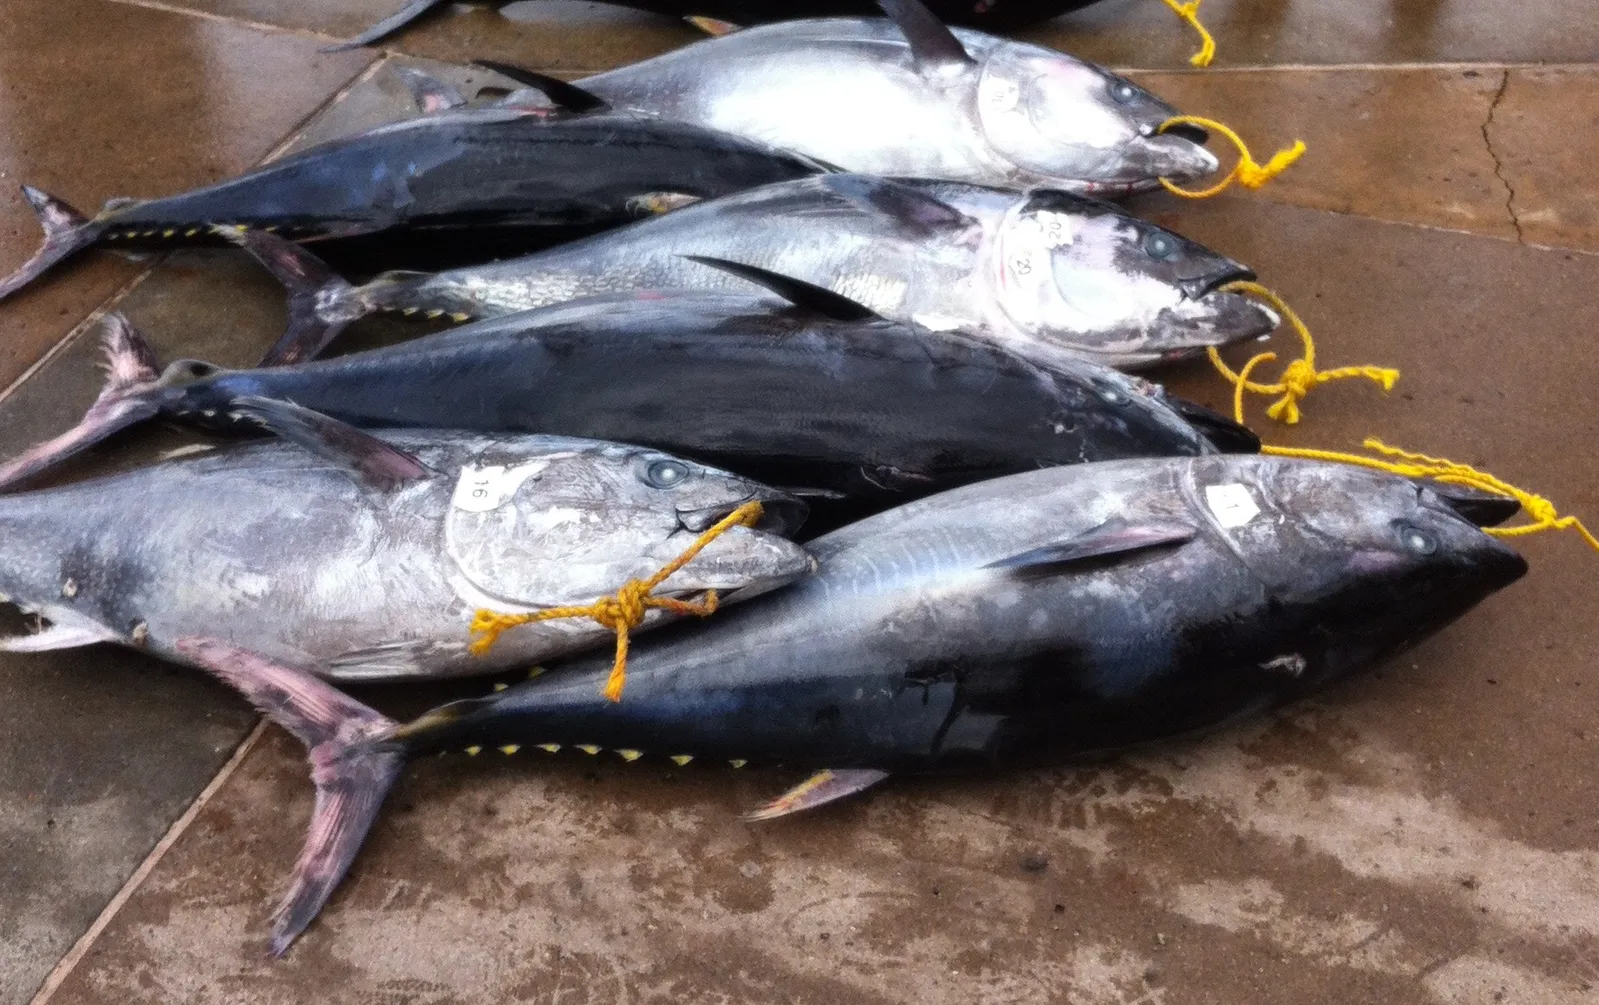 Threatened Bluefin Tuna Sells for Record $3 Million in New Year's Sale, Smart News